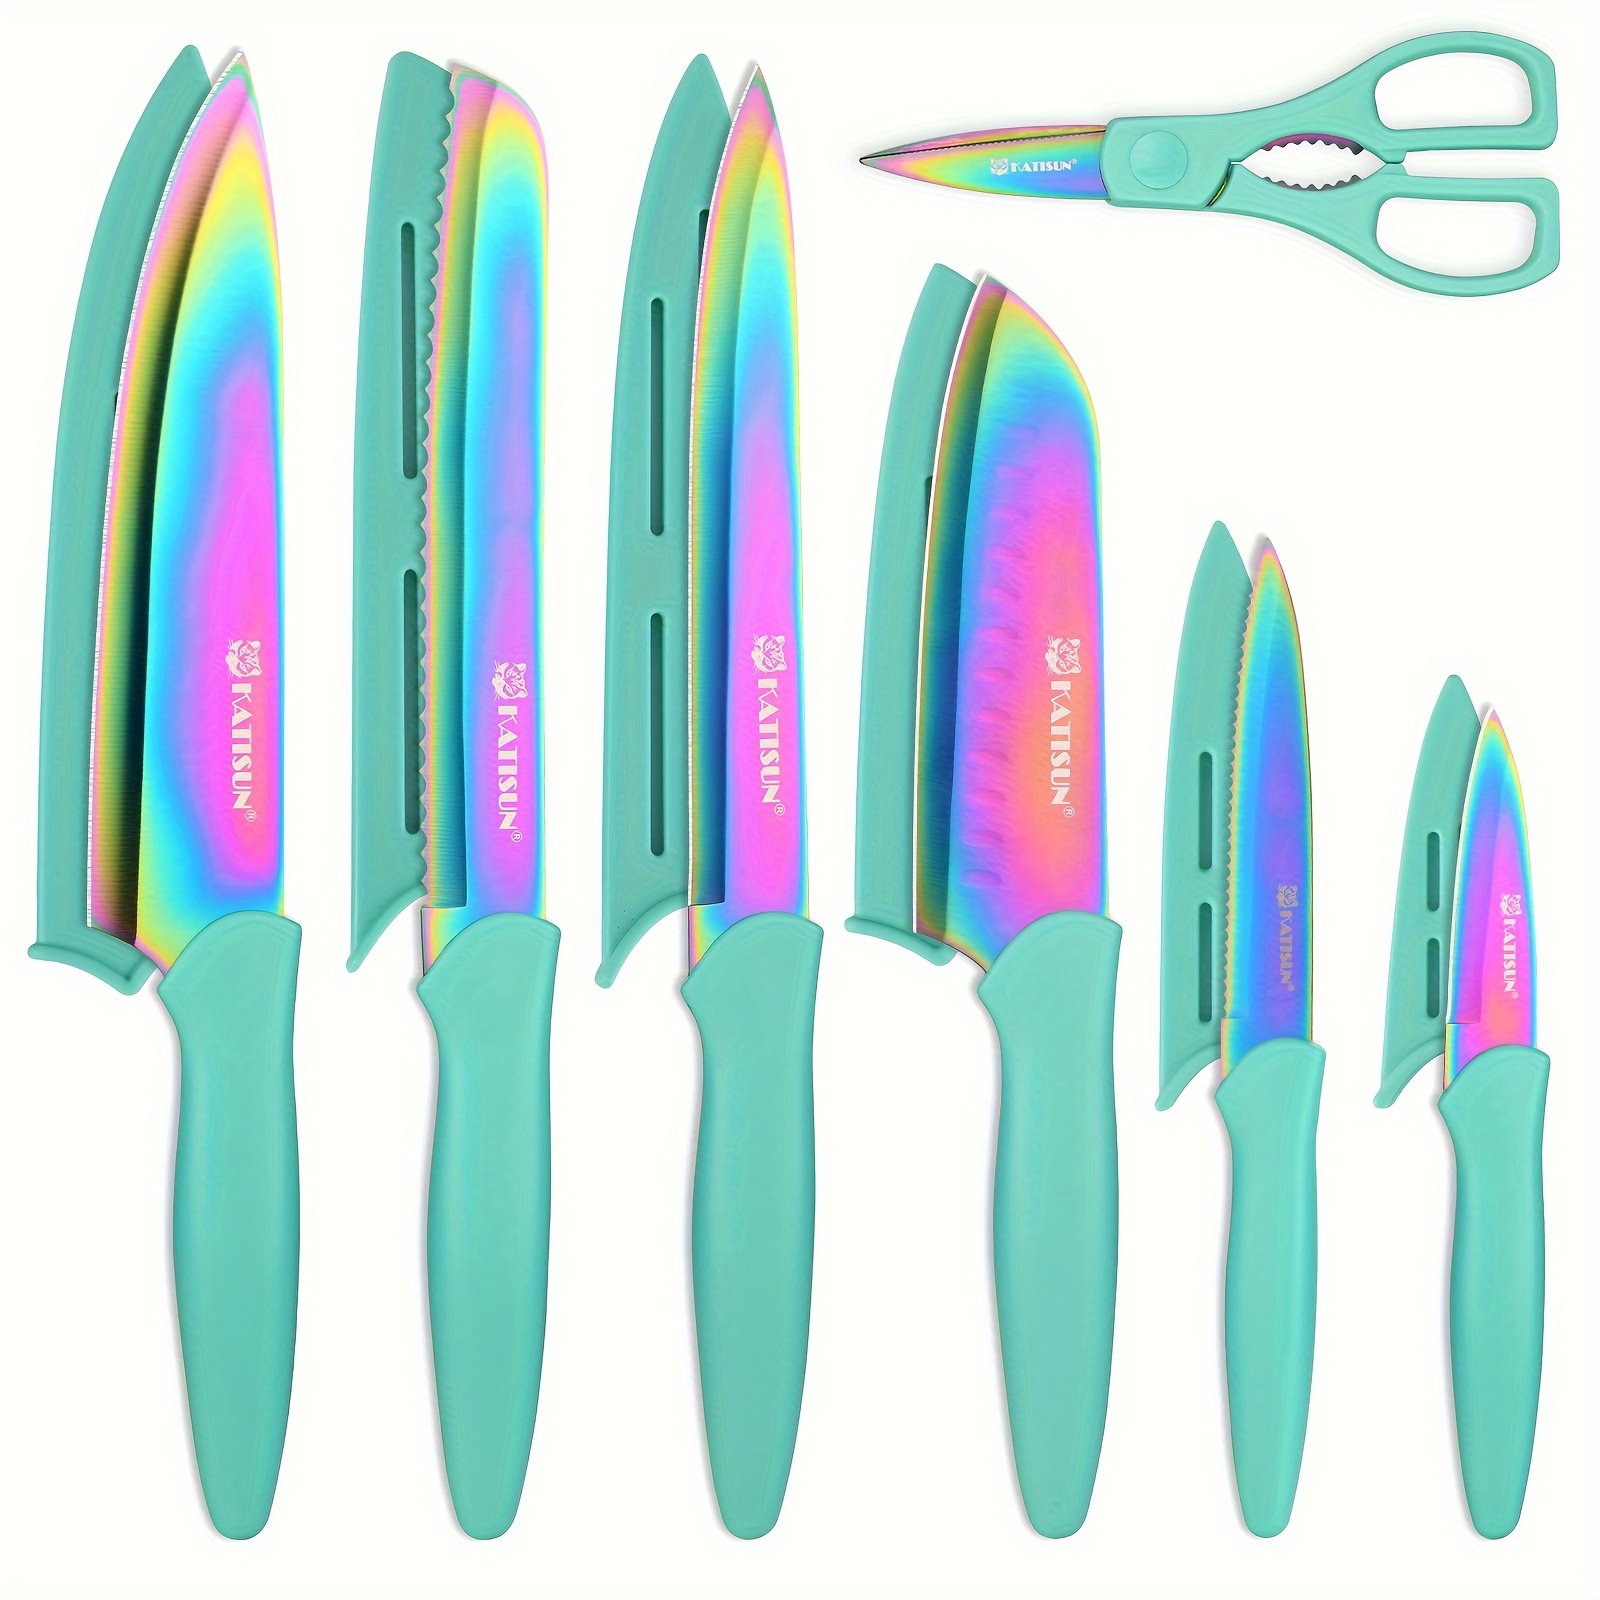 

Kitchen Knife Set With Guards, 13 Piece Rainbow Titanium Coated Stainless Steel Boxed Knives Set, Anti-rust And Dishwasher Safe, 6 Knives With 6 Blade Covers And Kitchen Shears